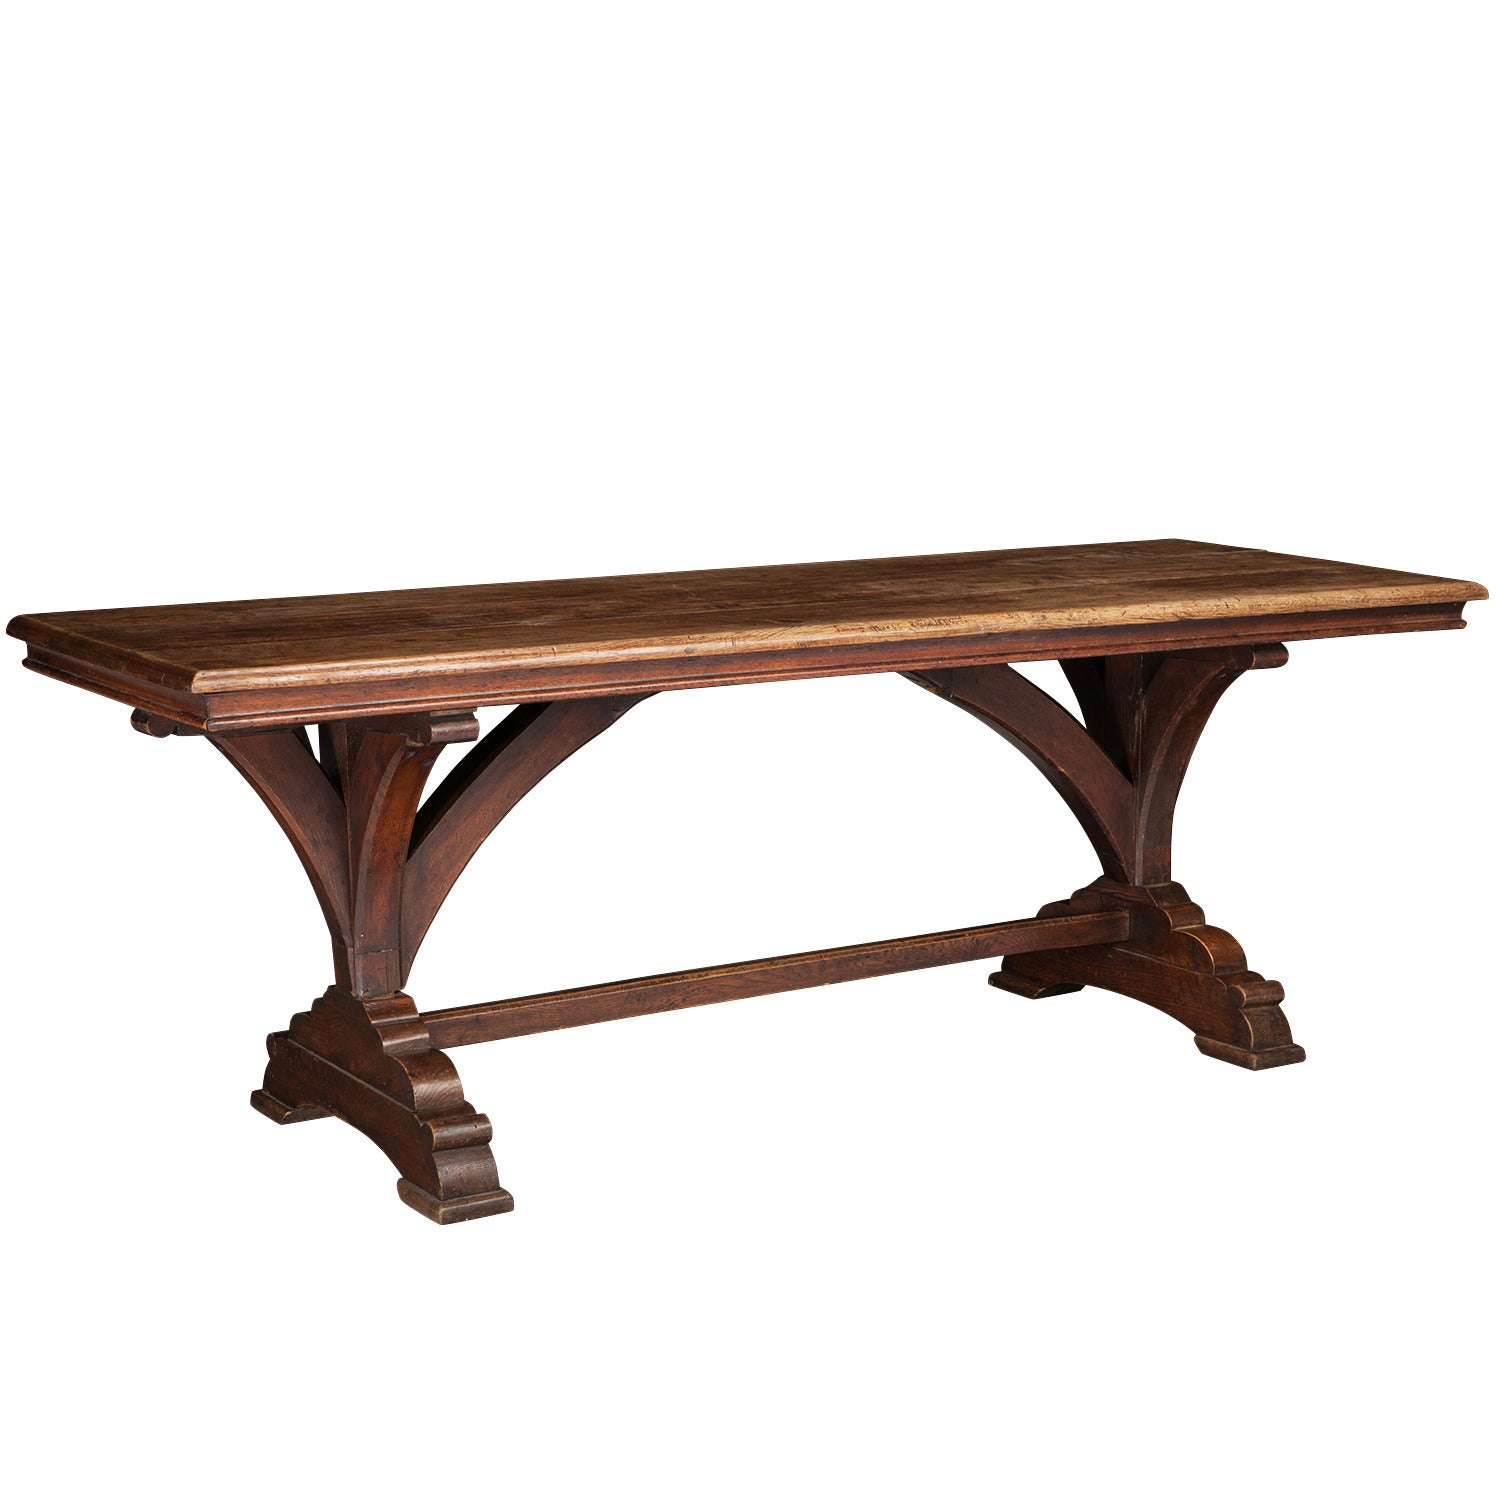 Gothic Refectory Table